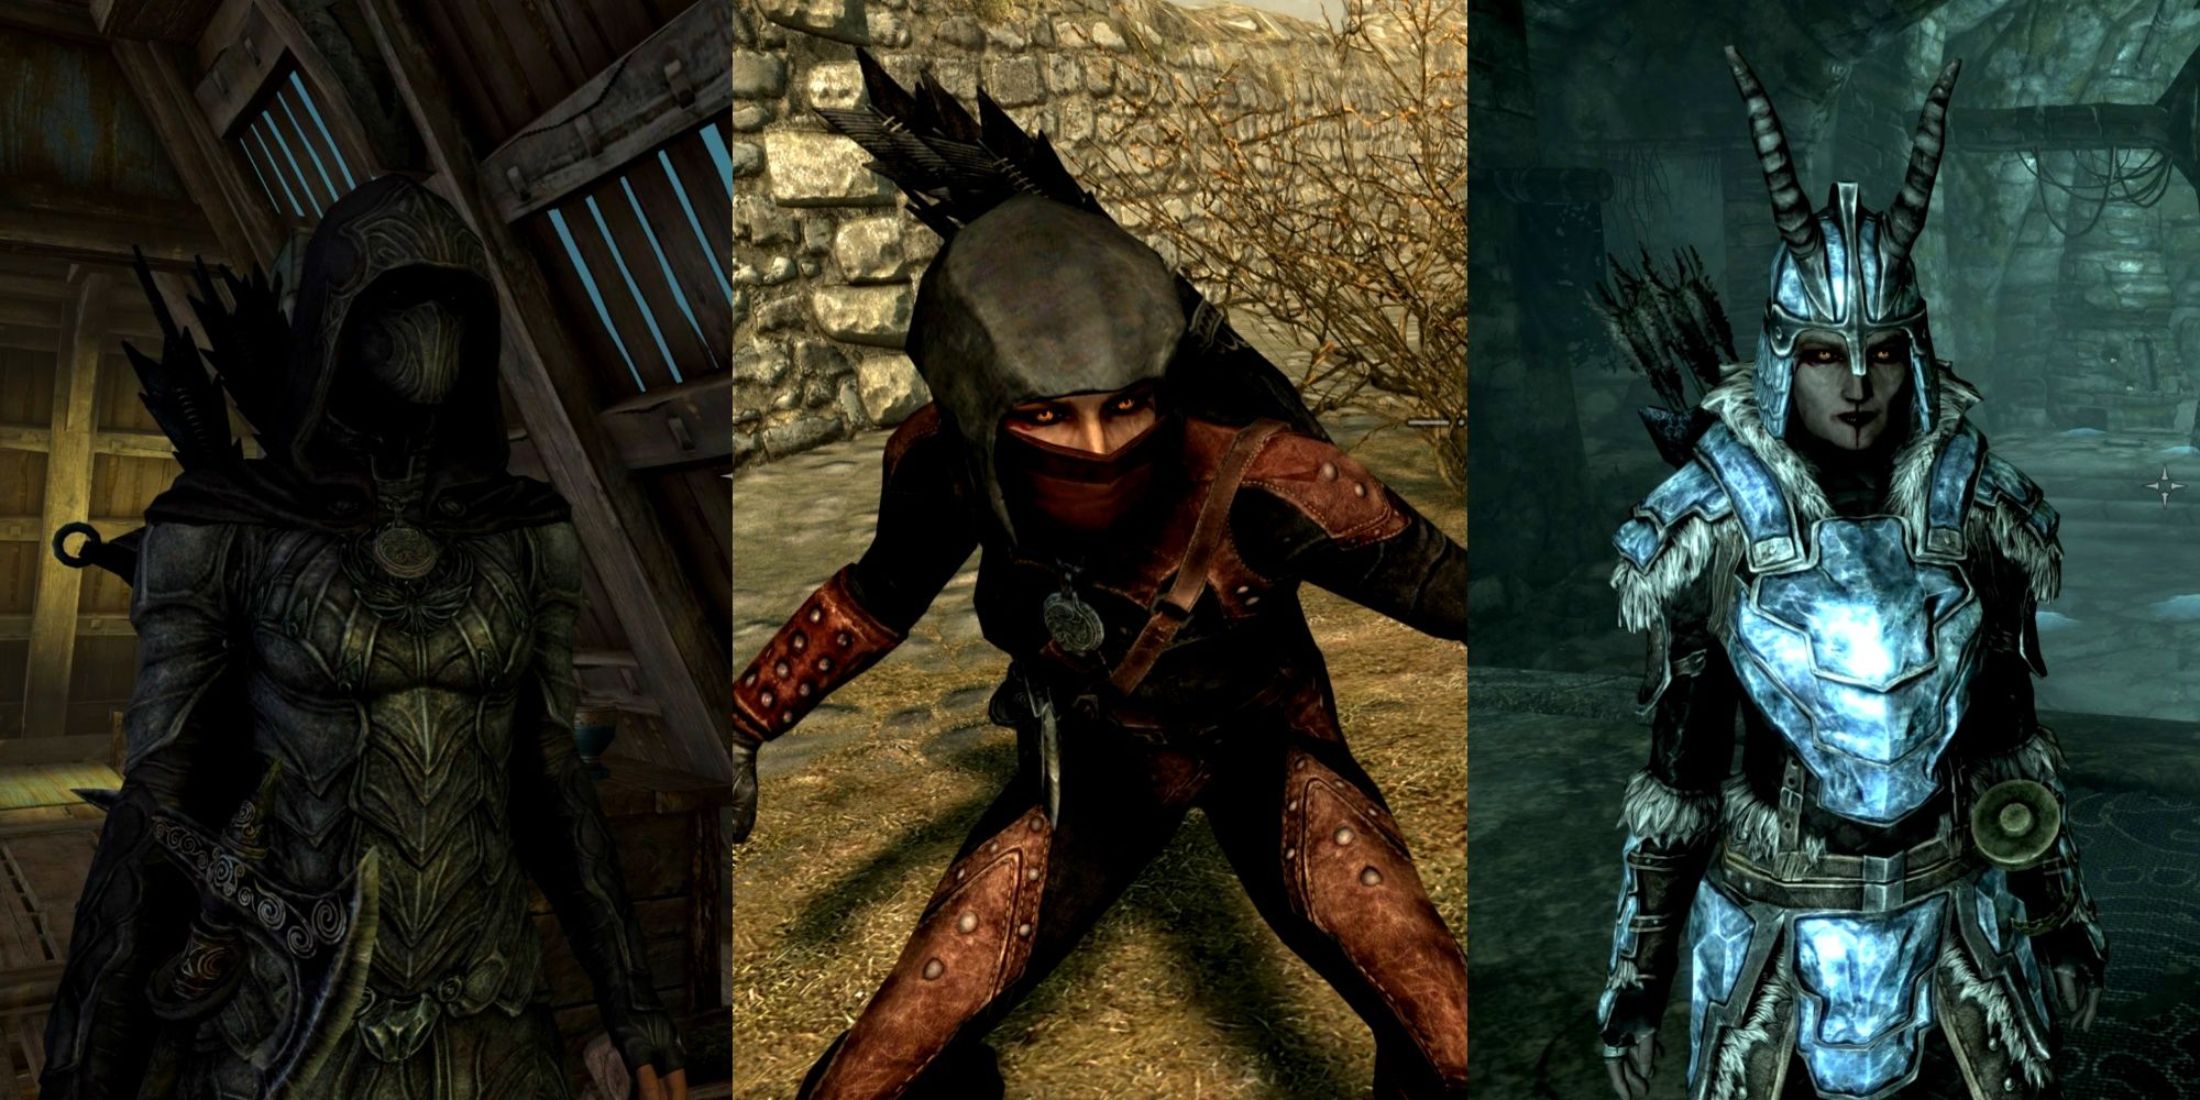 A split image of different Skyrim characters